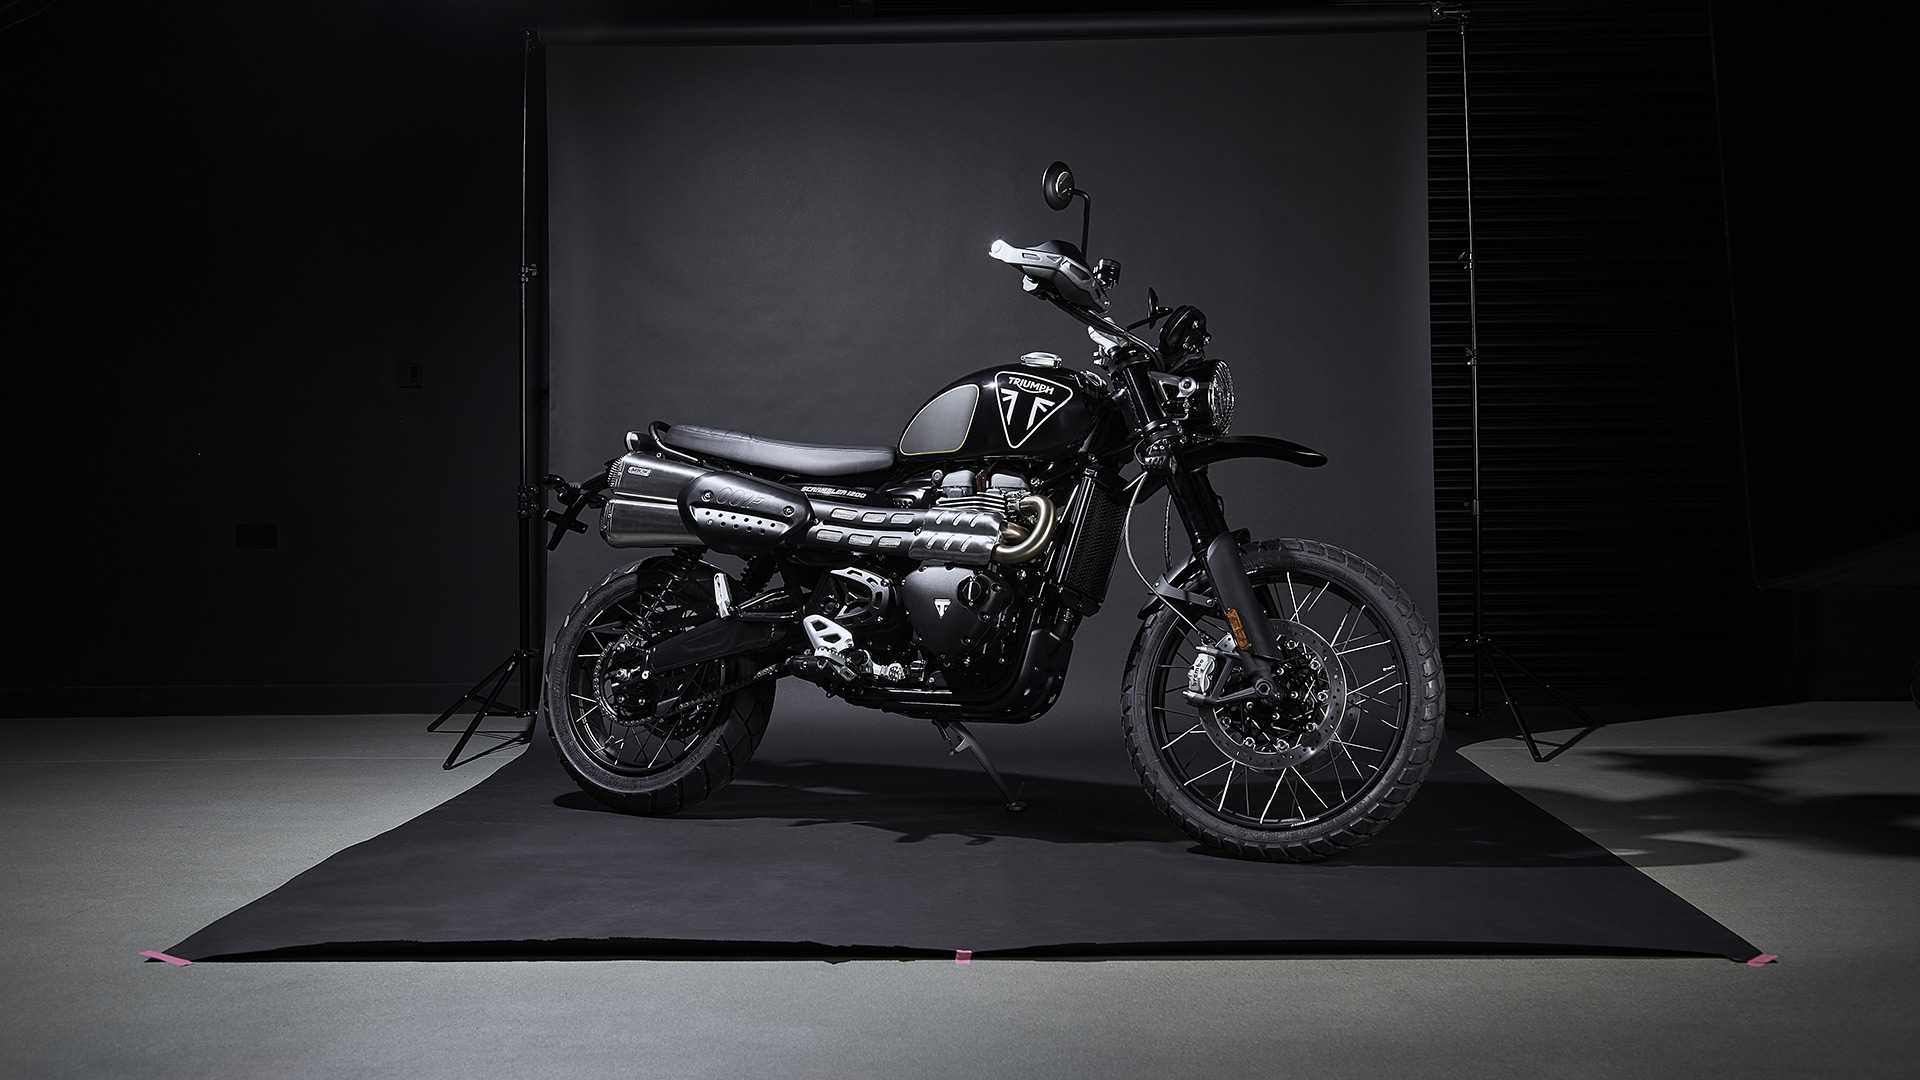 Triumph Scrambler 1200 - Bond Edition as NFT
- also in the MOTORCYCLES.NEWS APP